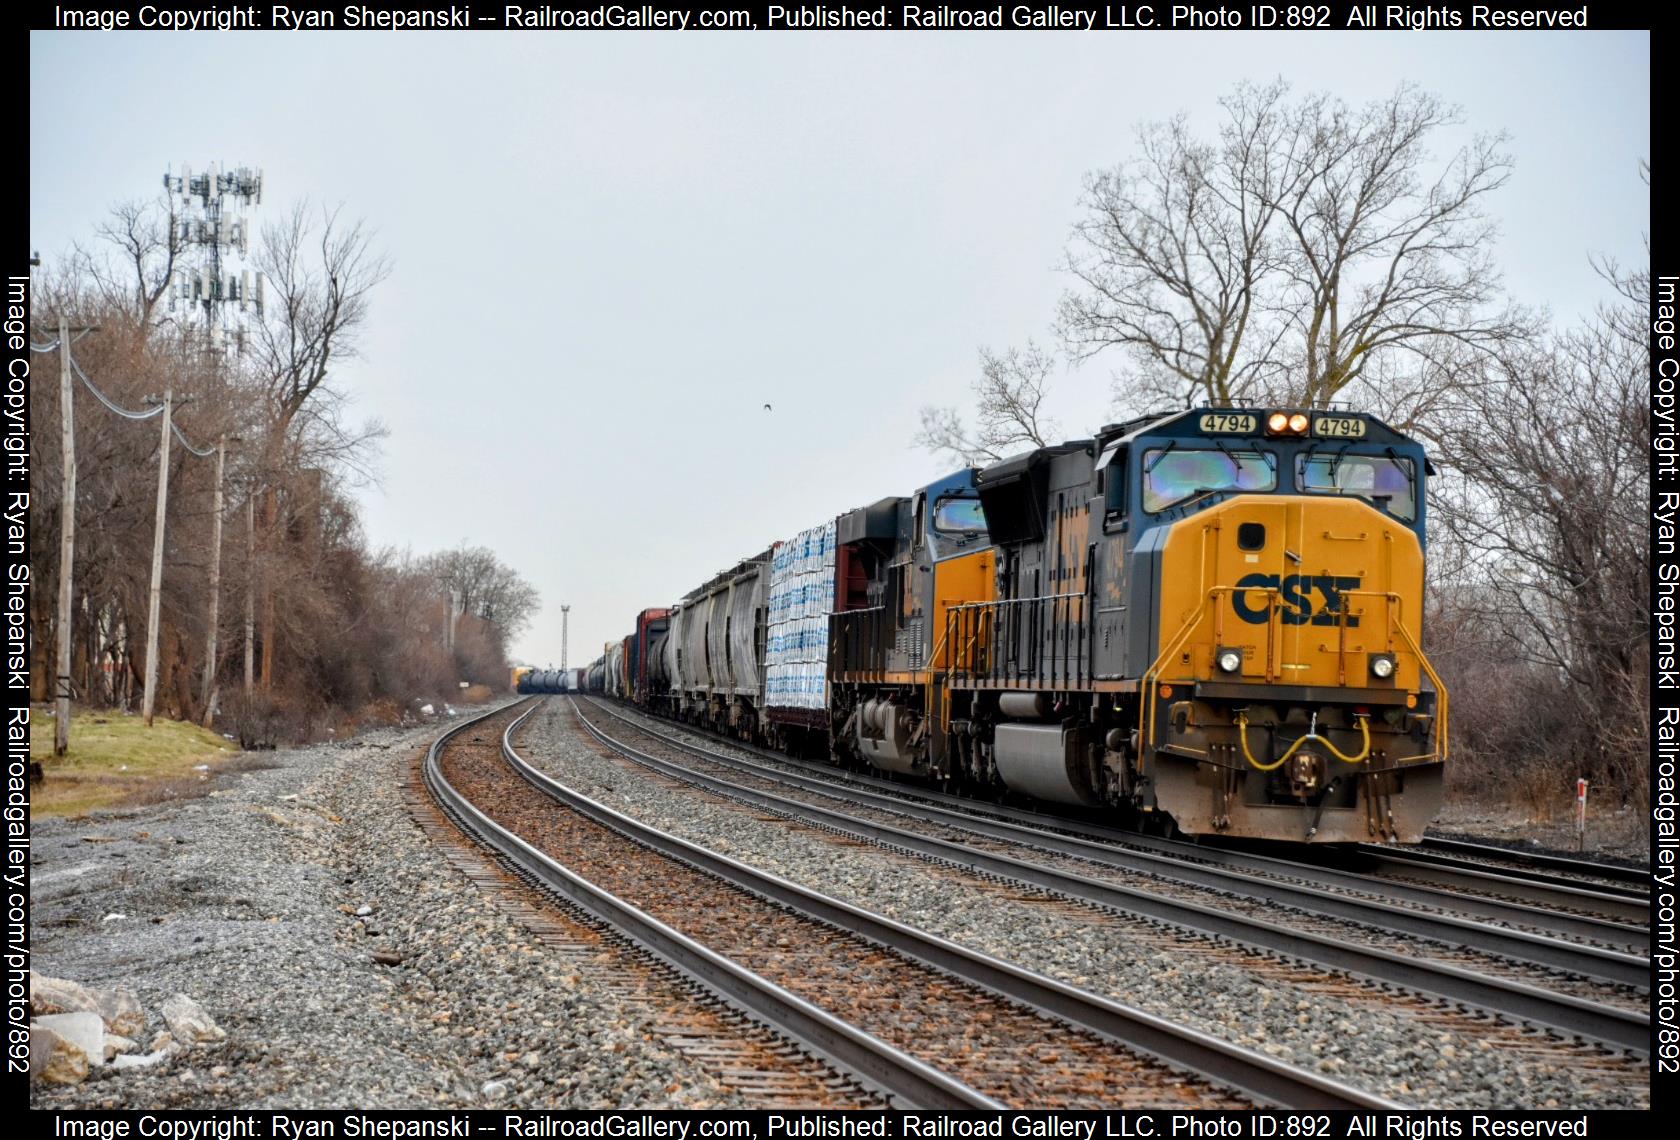 CSX 4794 is a class SD70AC and  is pictured in Rochester , NY, United States.  This was taken along the Rochester sub on the CSX Transportation. Photo Copyright: Ryan Shepanski uploaded to Railroad Gallery on 03/27/2023. This photograph of CSX 4794 was taken on Monday, March 27, 2023. All Rights Reserved. 